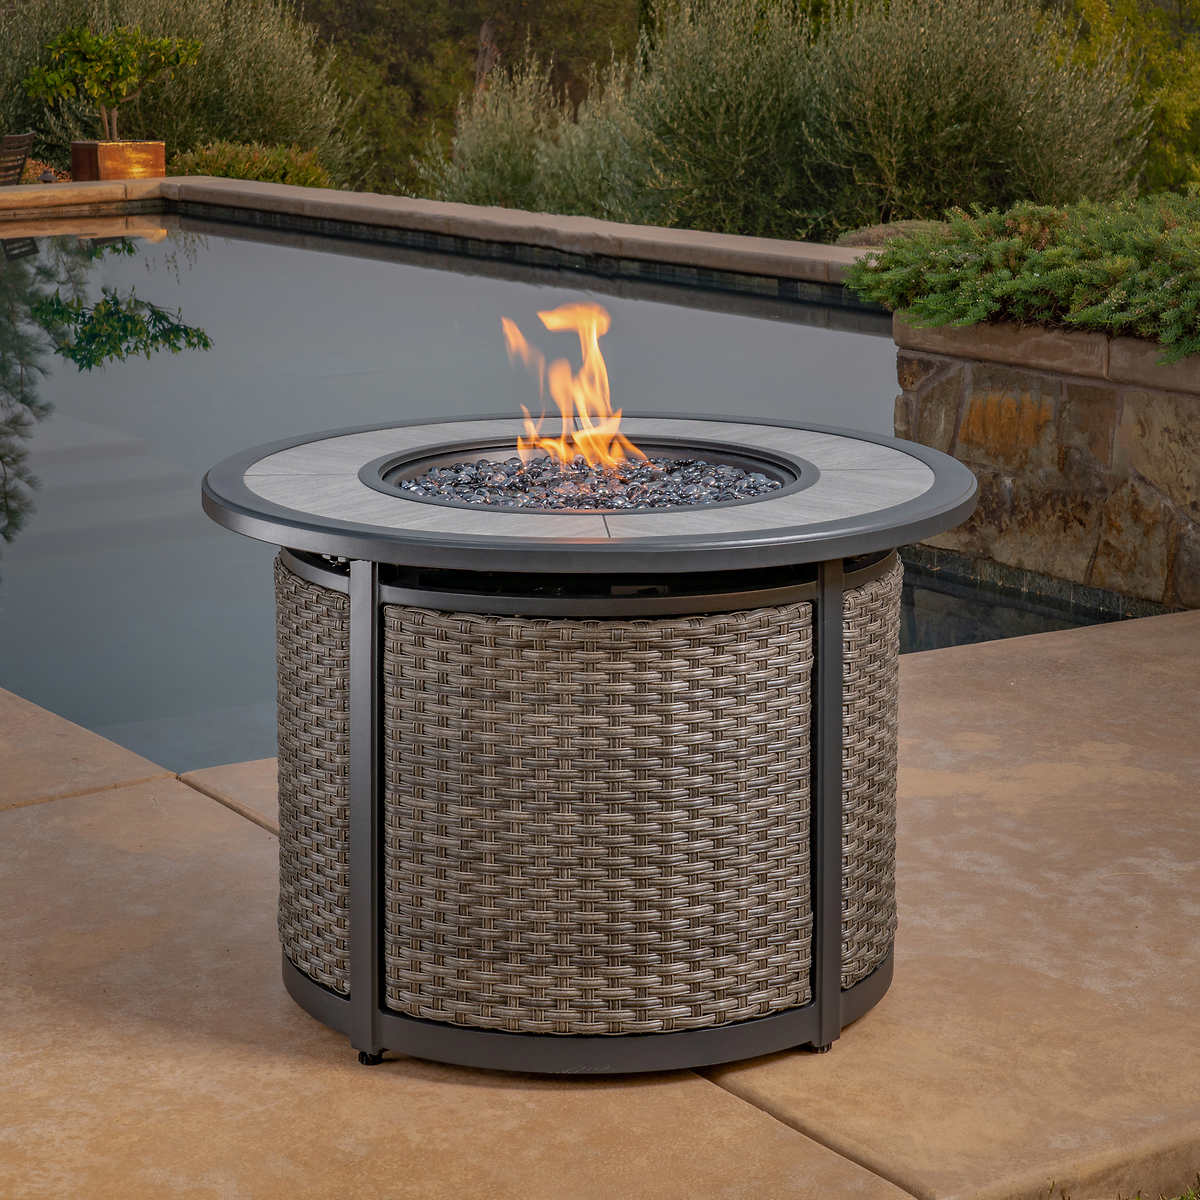 Madison Fire Pit Table Costco, Fire Pit Table Made In Usa